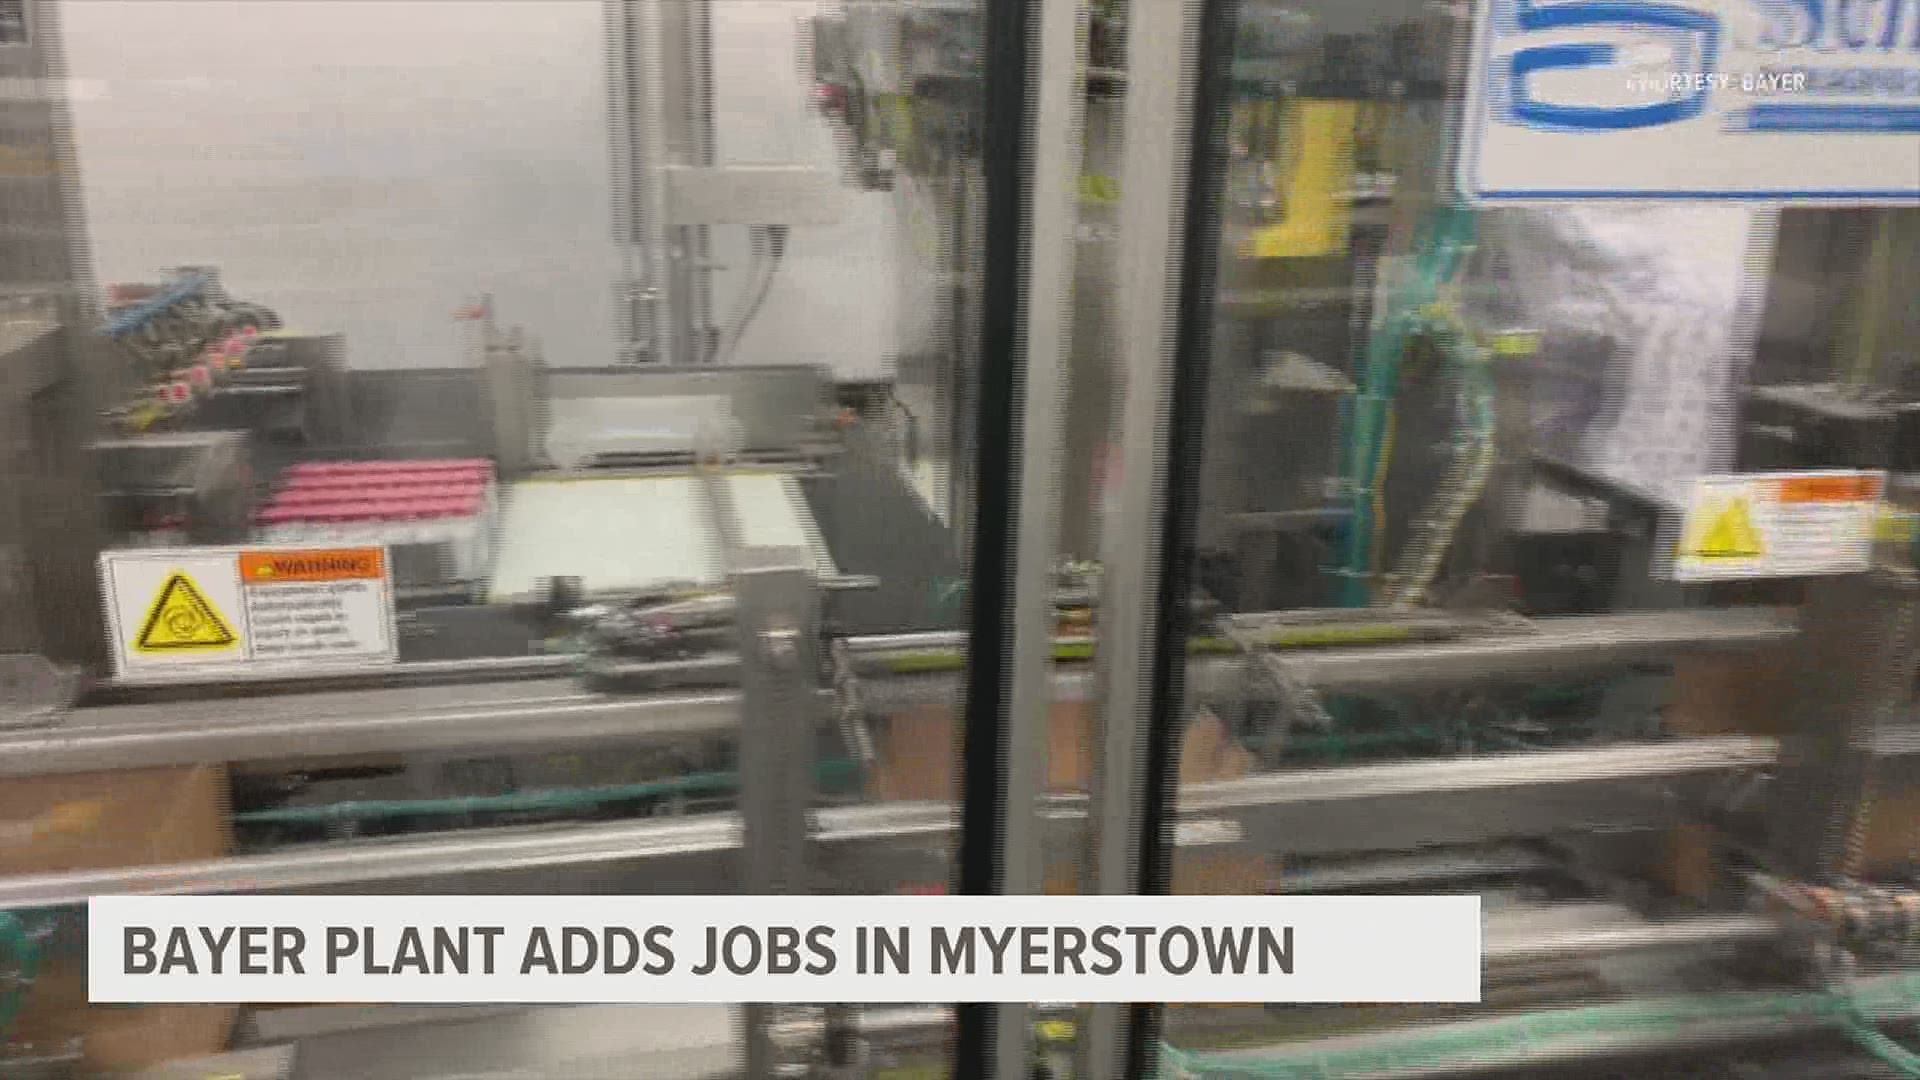 The manufacturing facility officials say they are committed to hiring locals for more community engagement.